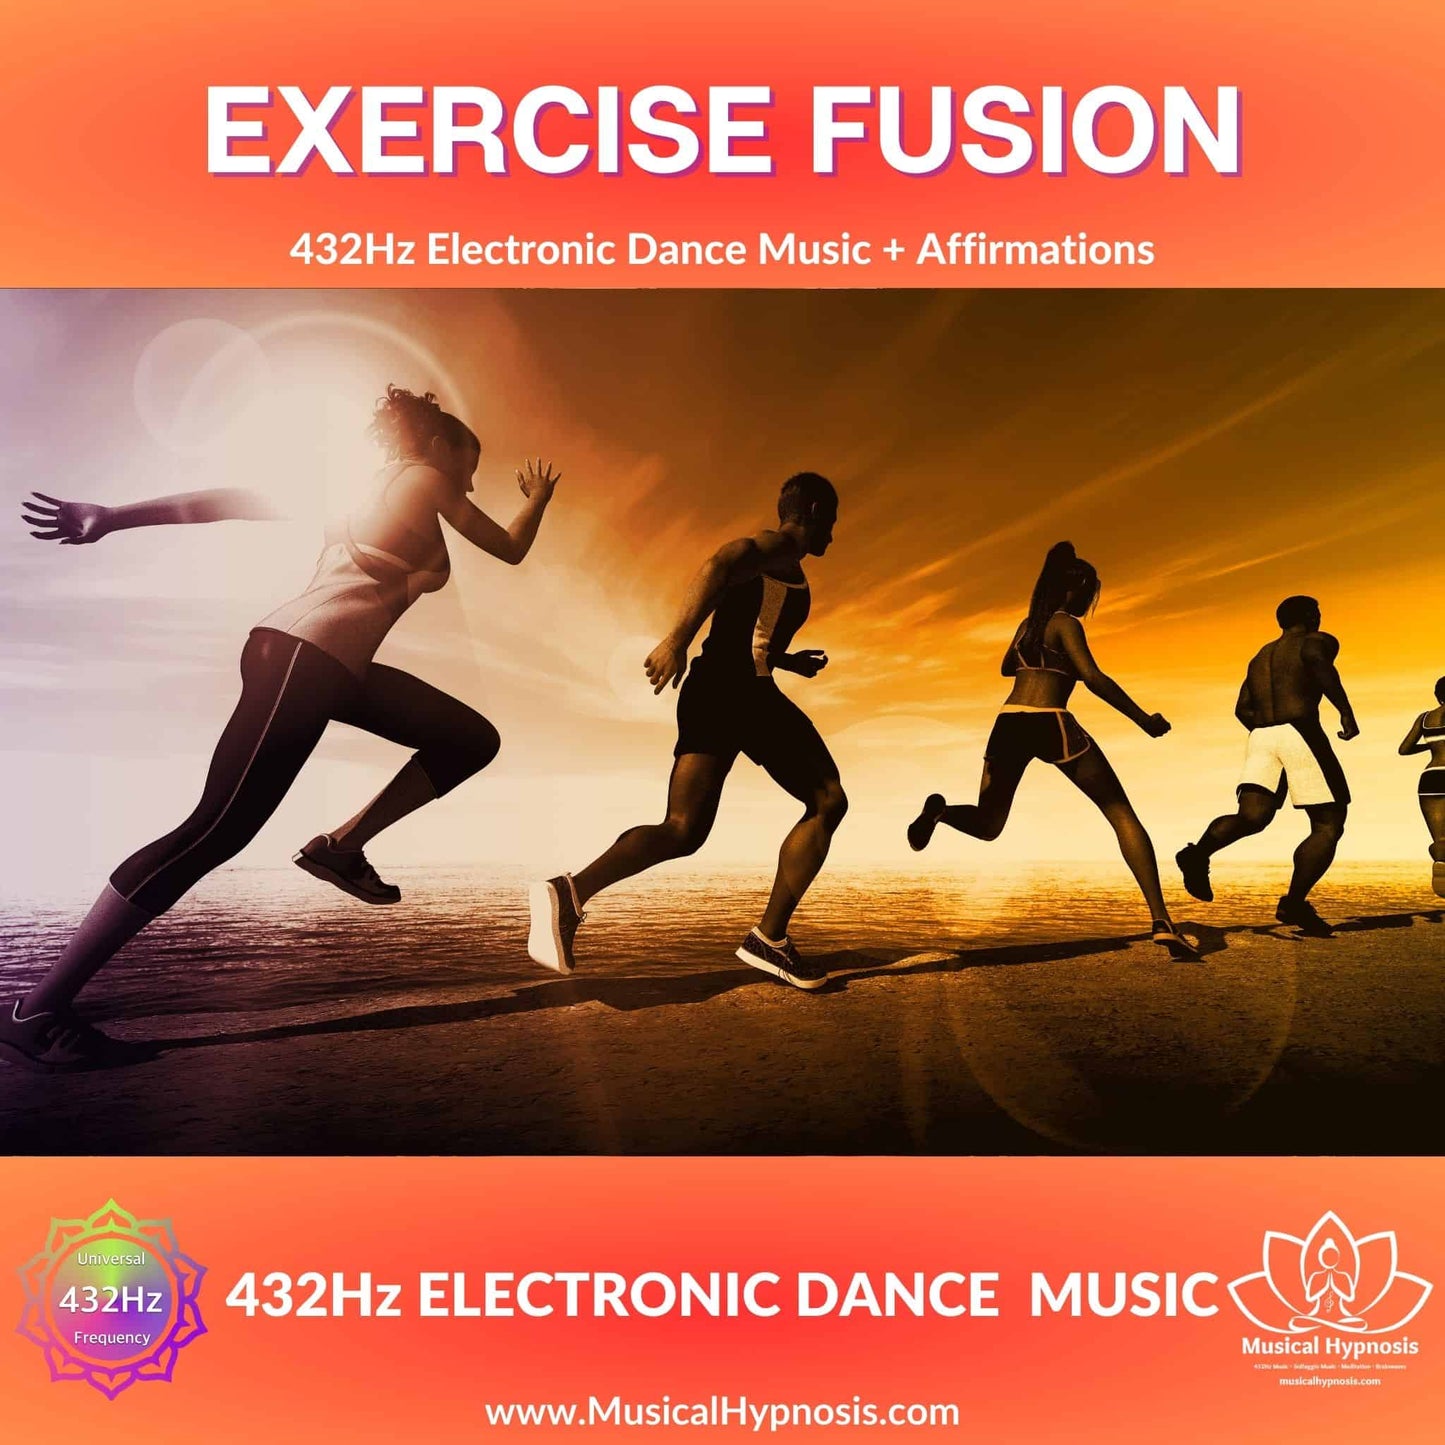 Exercise Fusion • 432Hz Electronic Dance Music + Affirmations